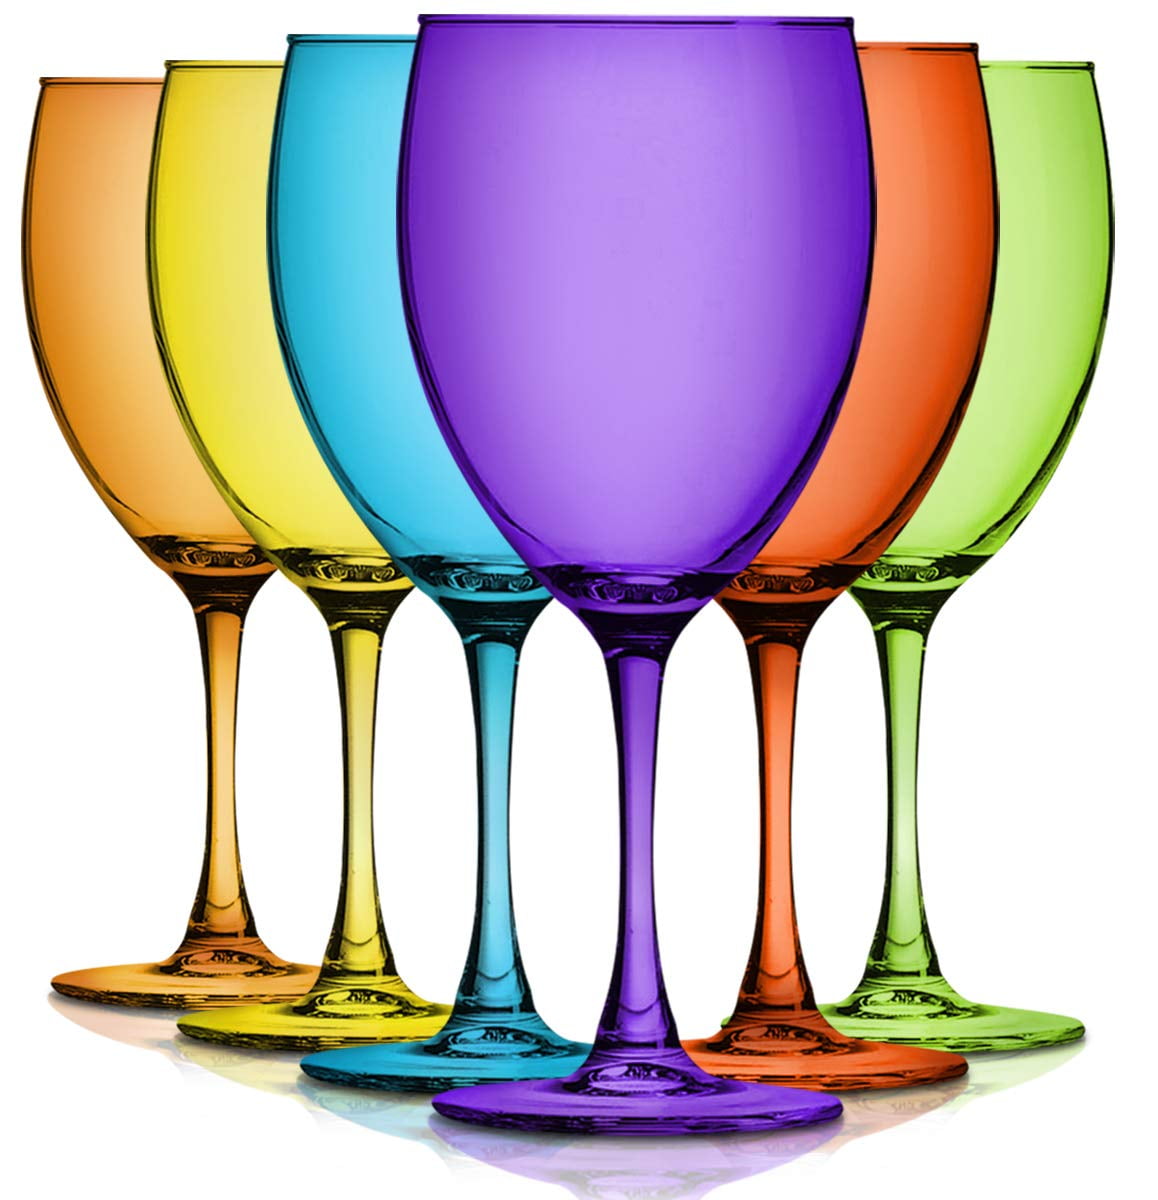 TableTop King Colored Wine Glasses Set of 6 - Colorful Stem Wine  Glasses 10 Oz - Red Nuance Accent Cute Wine Glass Set - Sturdy Drinking  Glasses - Multiple Vibrant